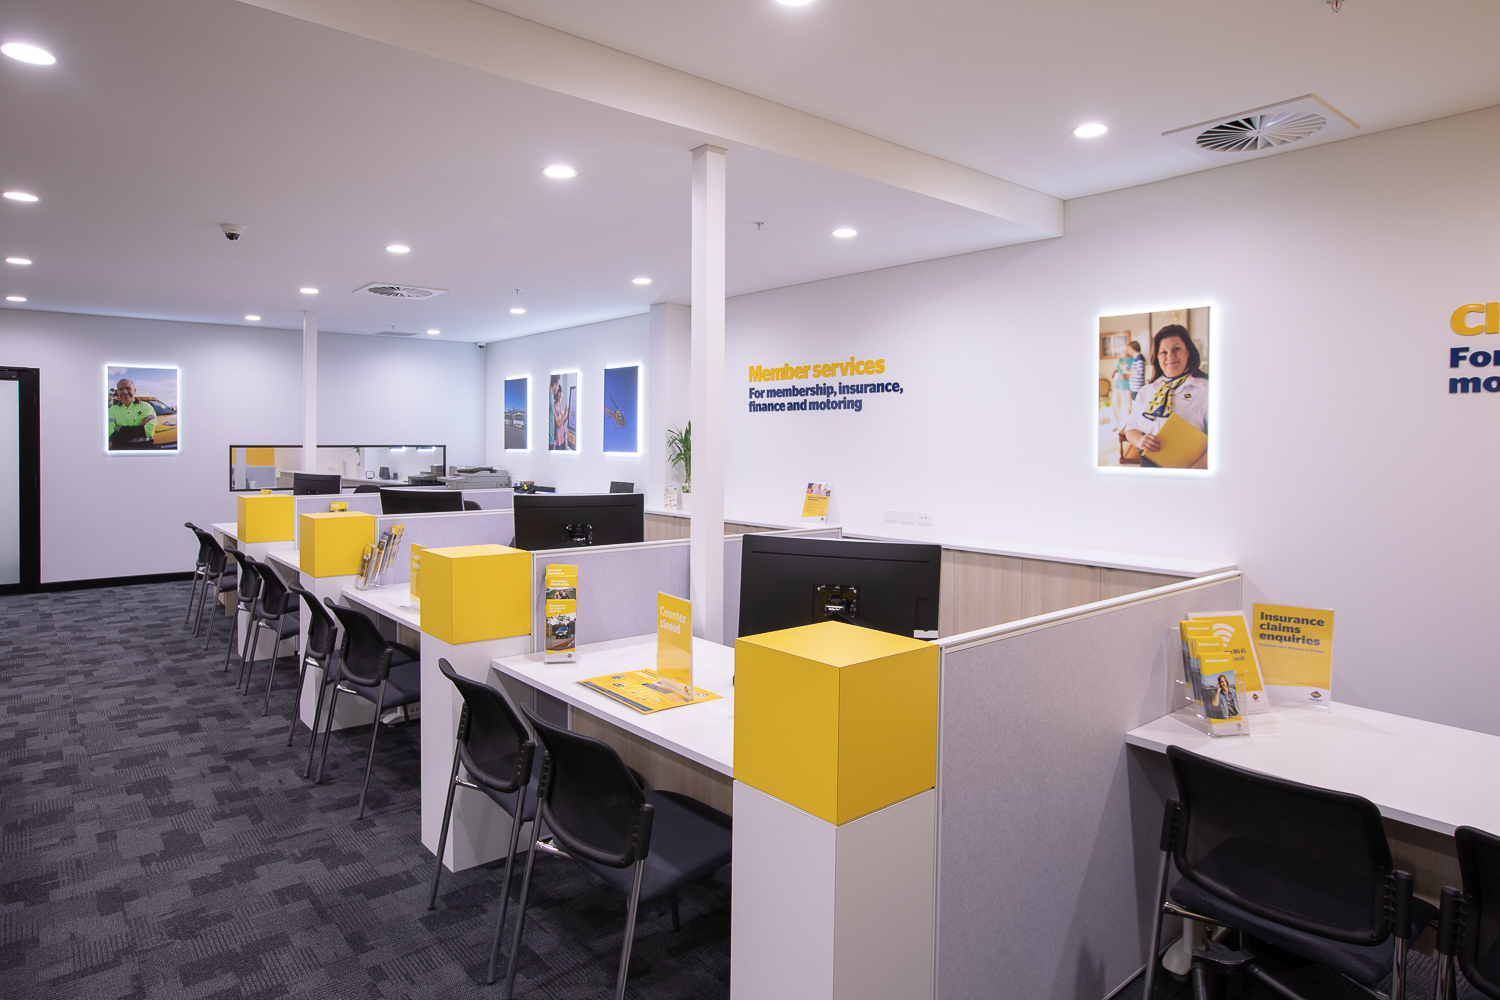 Office Fitouts Perth